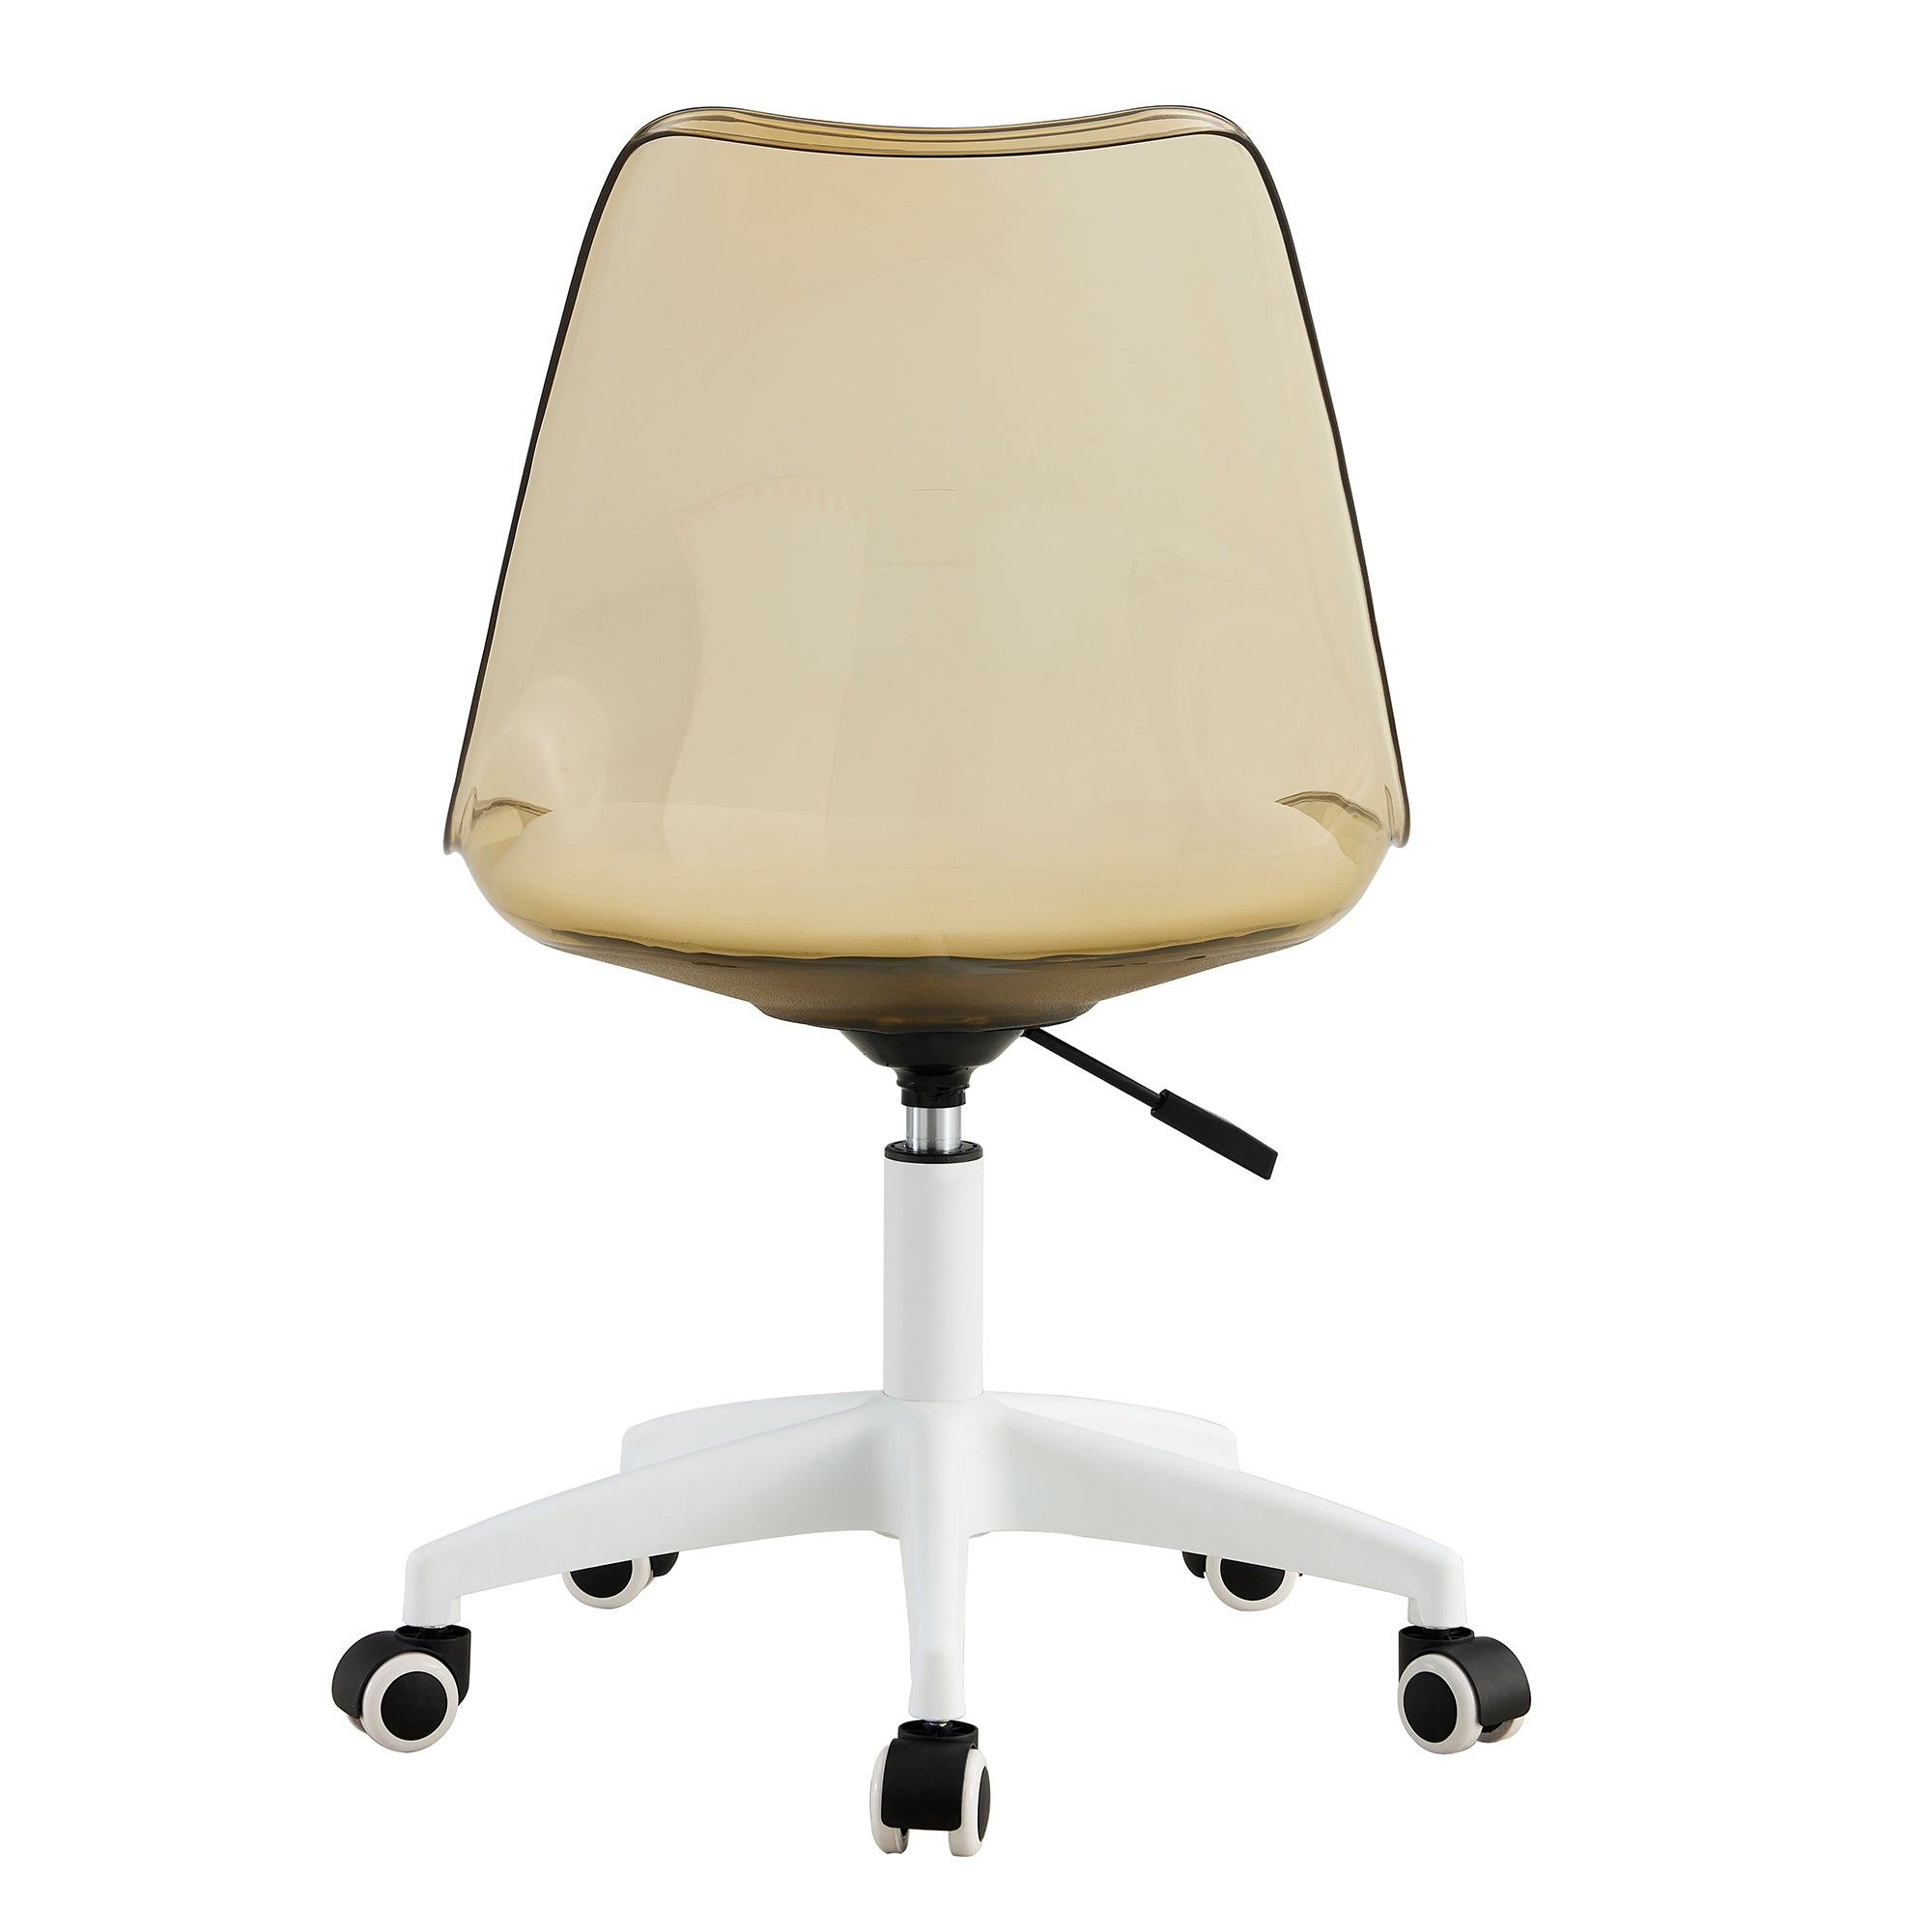 MAICOSY Modern Home Office Desk Chairs Swivel Engineering Adjustable 360° Chair - Amber Brown